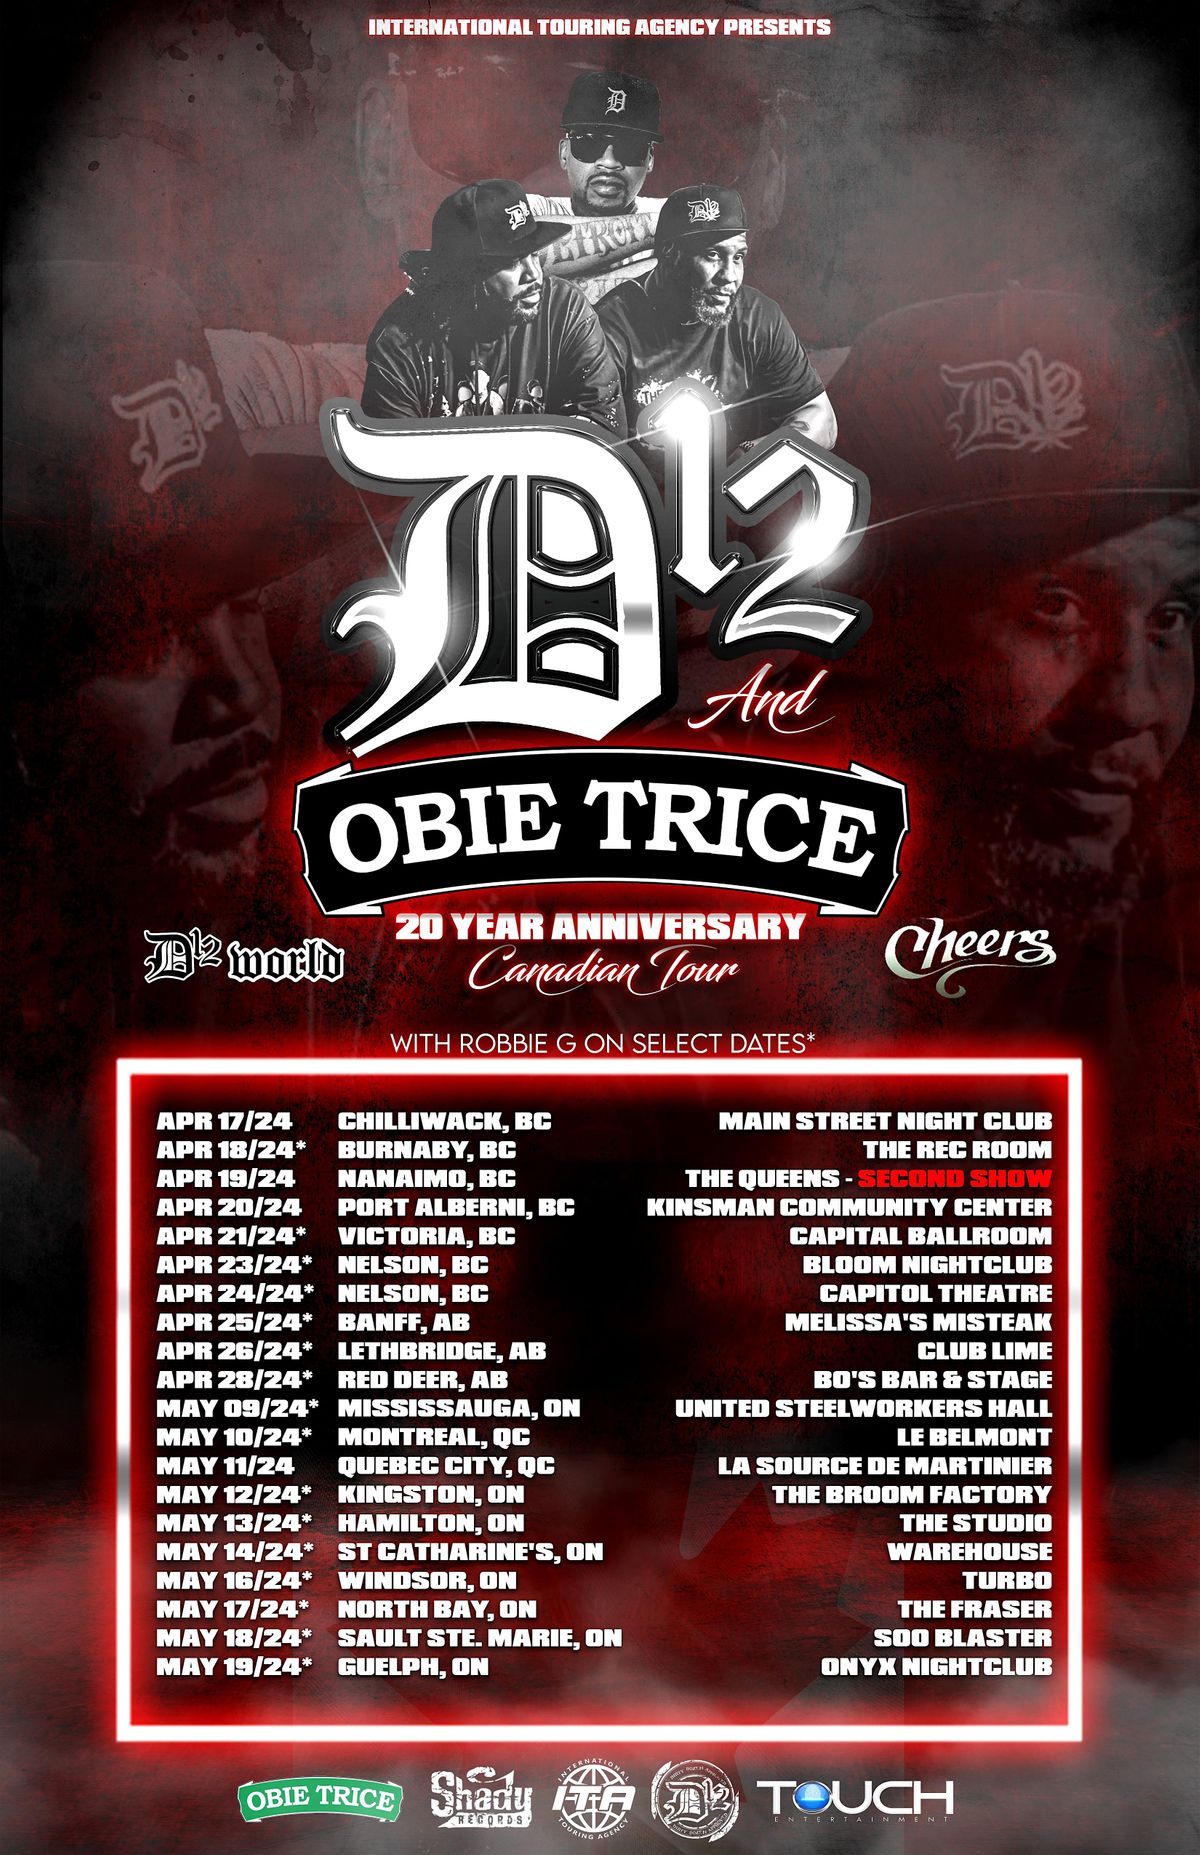 D12 & Obie Trice Live in Montreal May 10th at Le Belmont with Robbie G